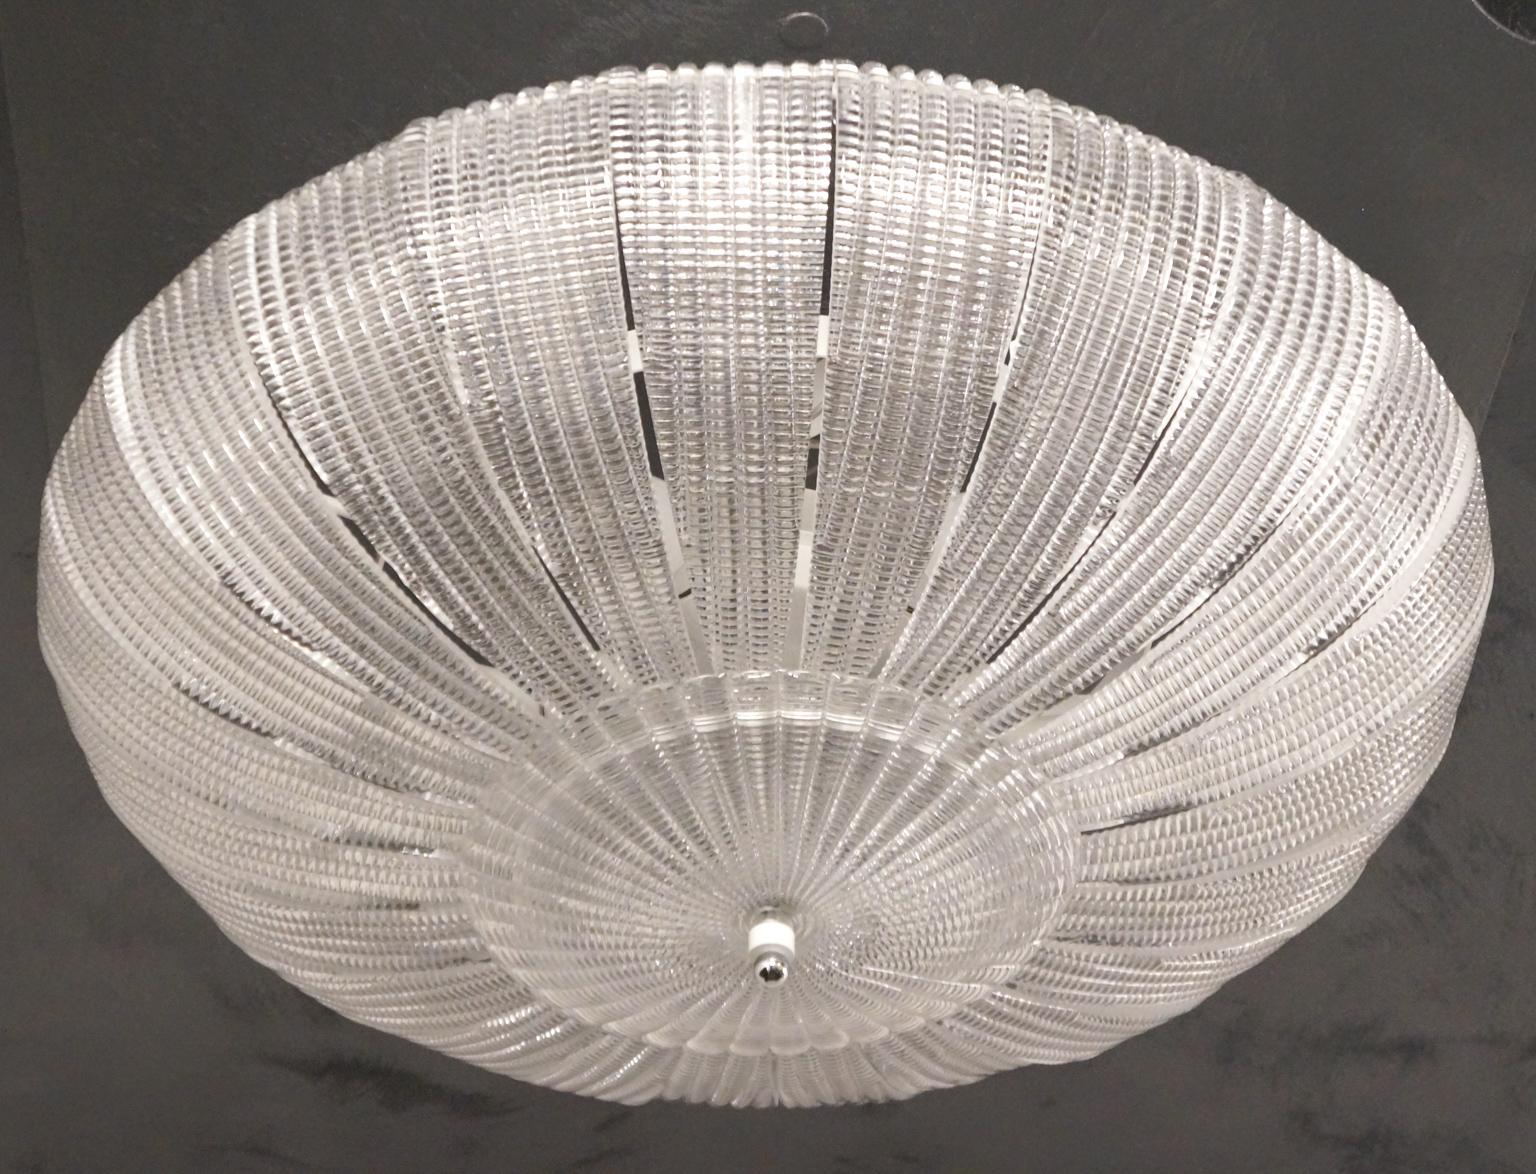 A very important ceiling lamp for its size that reaches a diameter of 85 cm (inches 33.46).
Composed of 24 glass elements called 